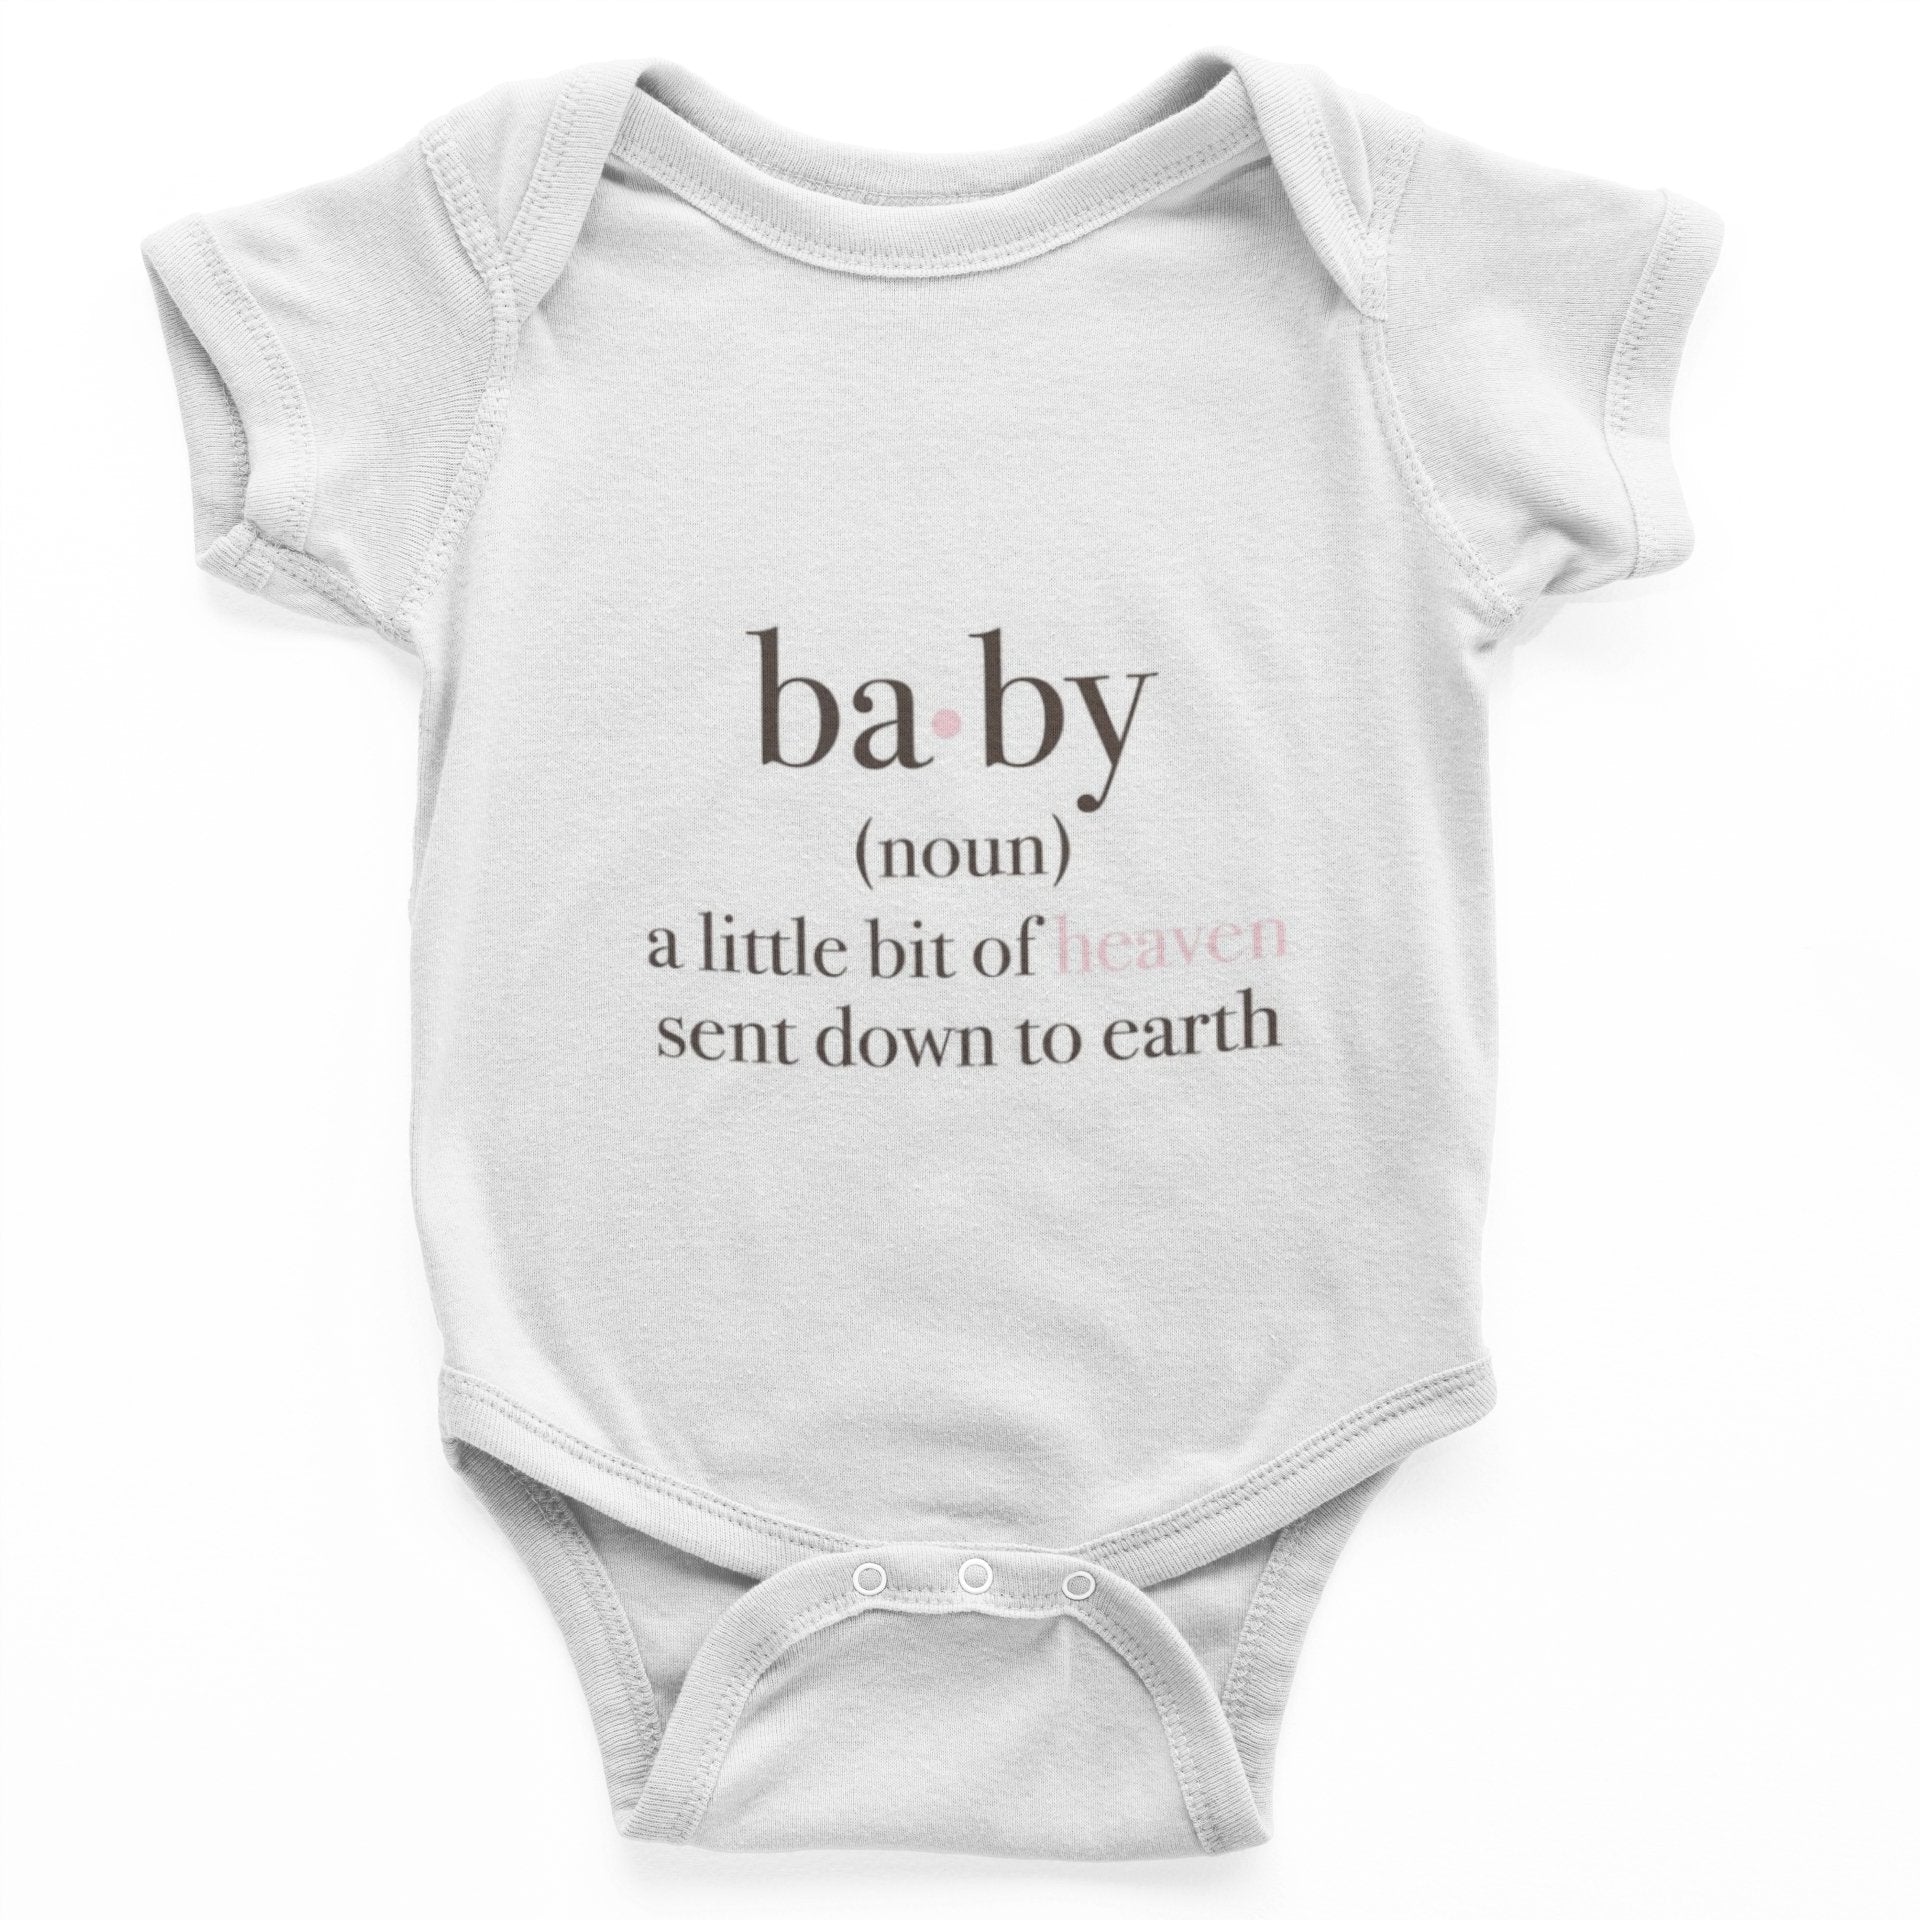 thelegalgang,Baby Quote Onesies for Babies,.